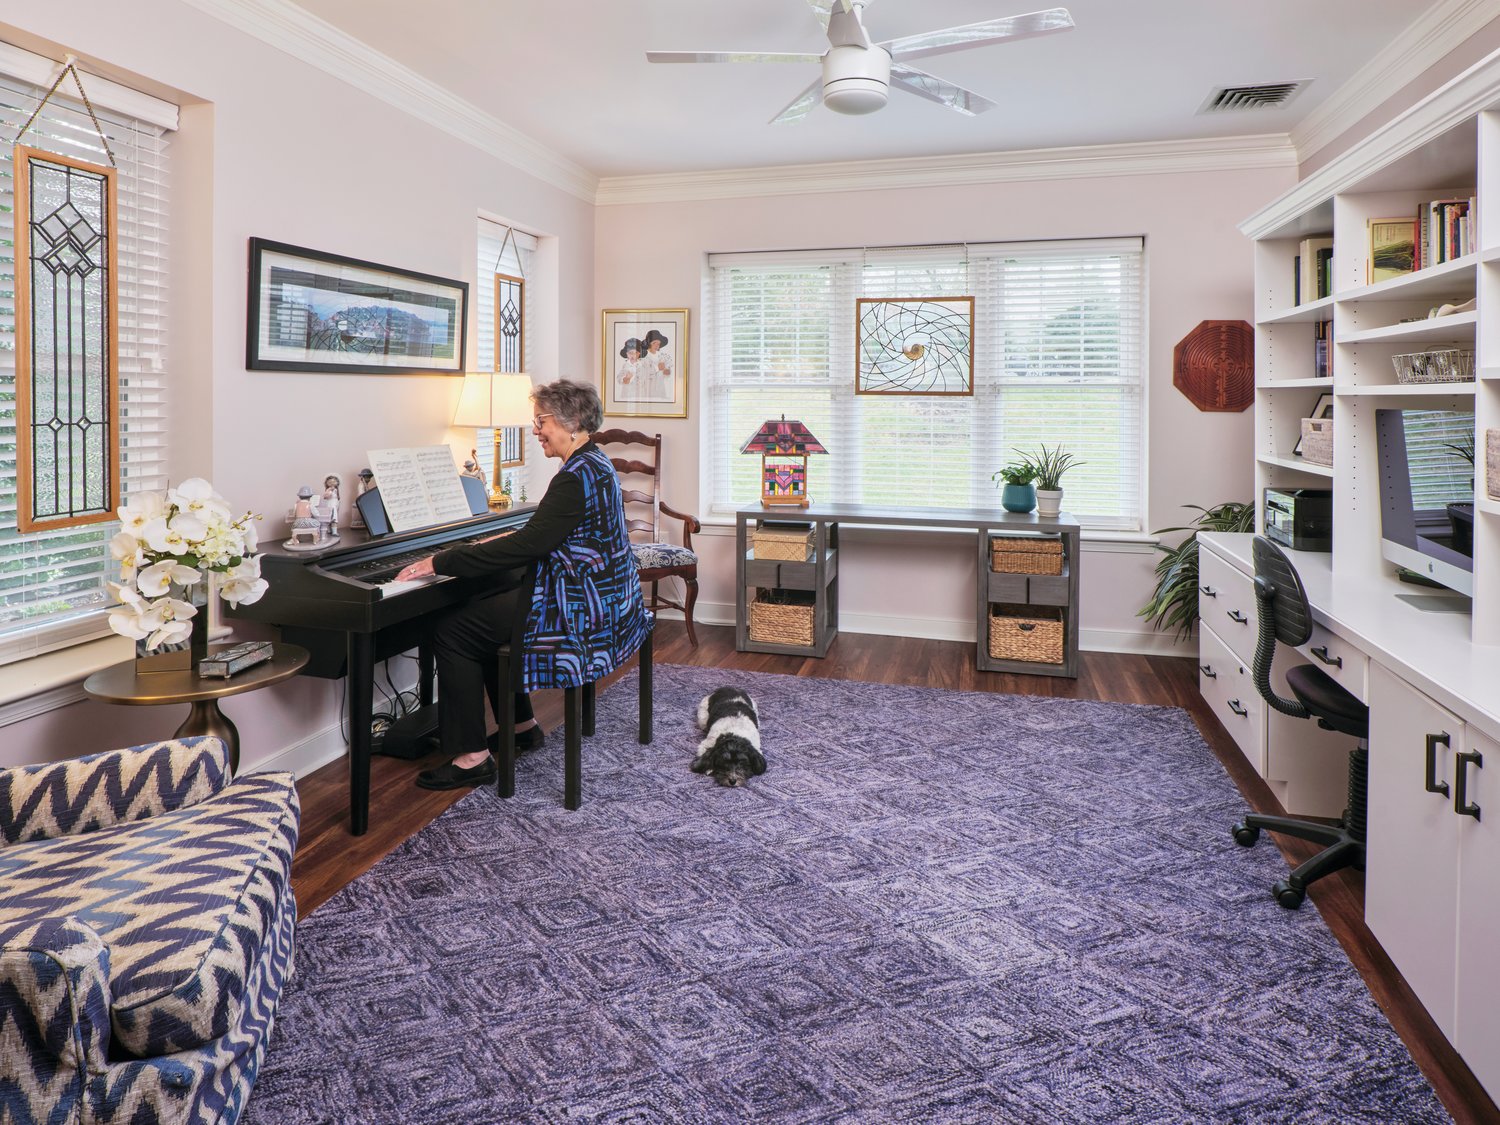 Inez enjoys playing piano in the light-filled room off the living room. It is also where she has her office.